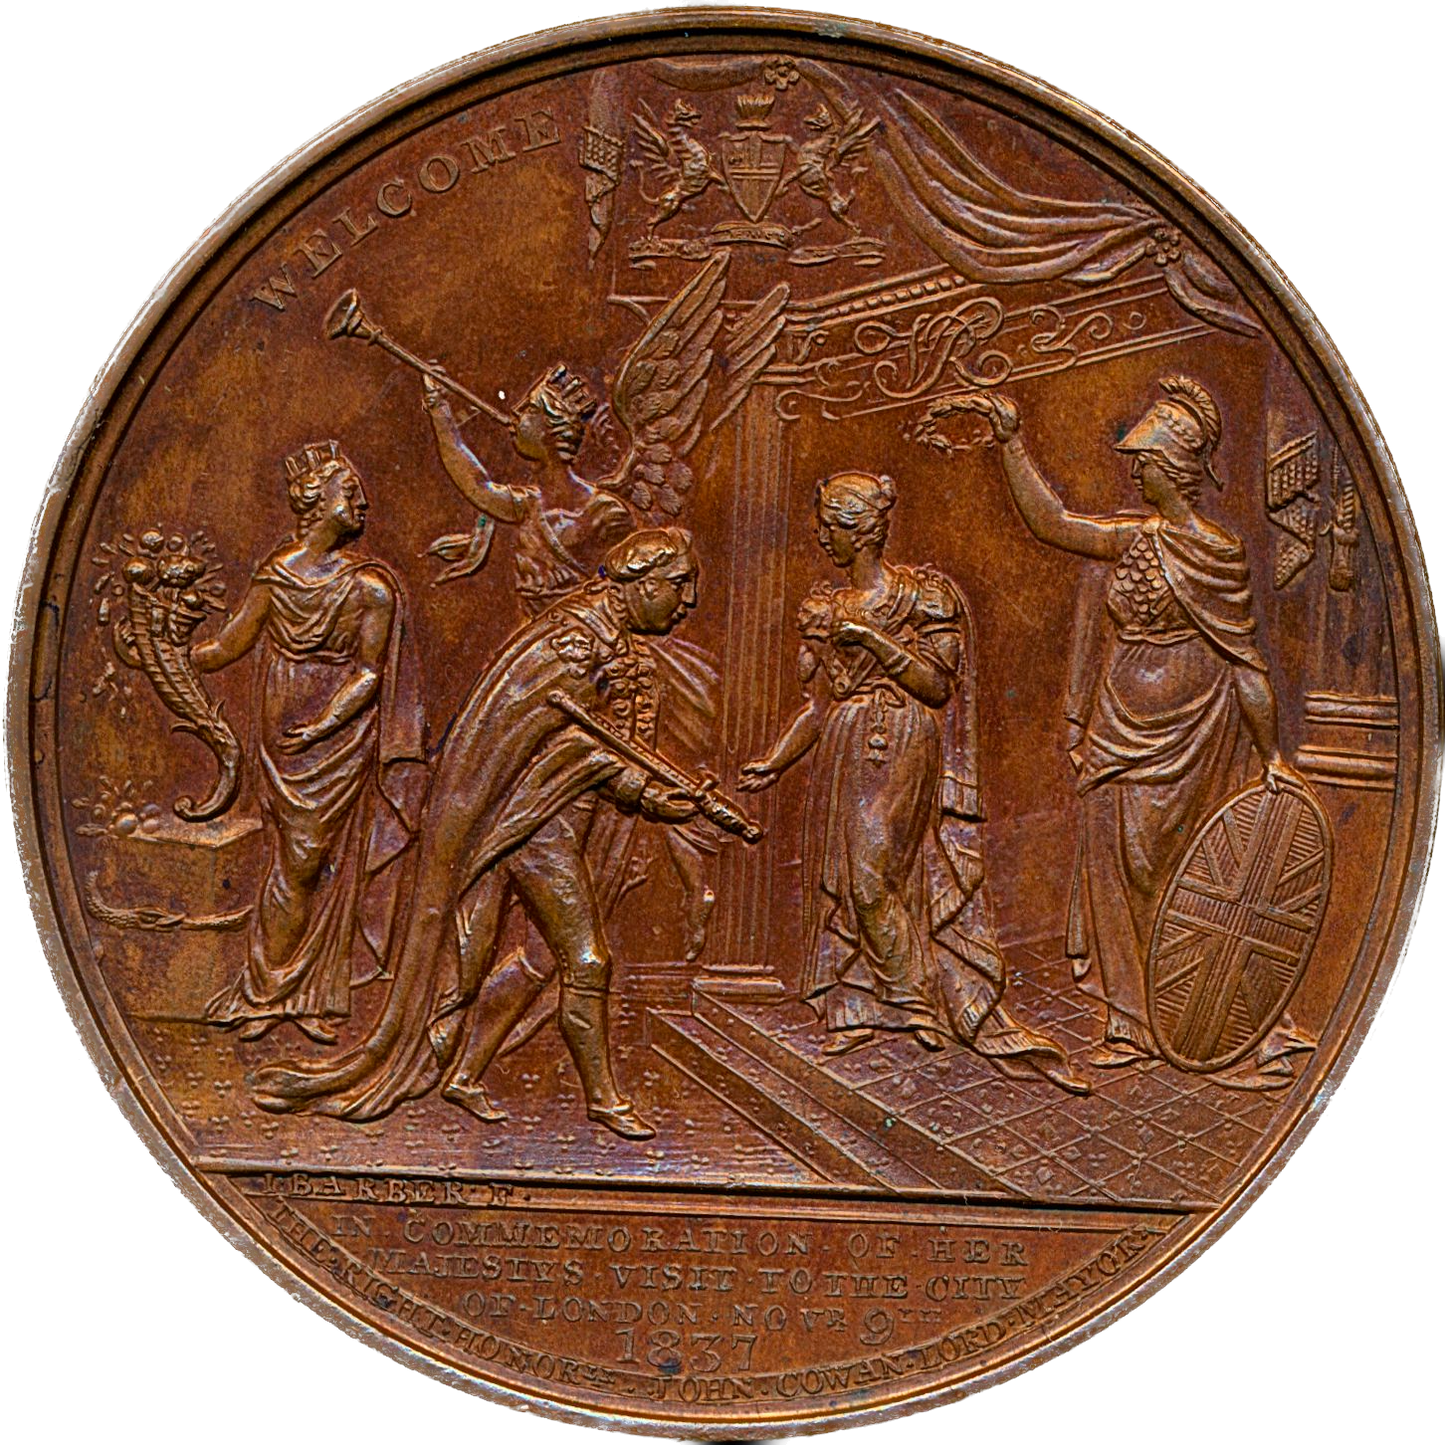 1837 Royal Visit to City of London 61mm bronze medal E1303 BHM 1772